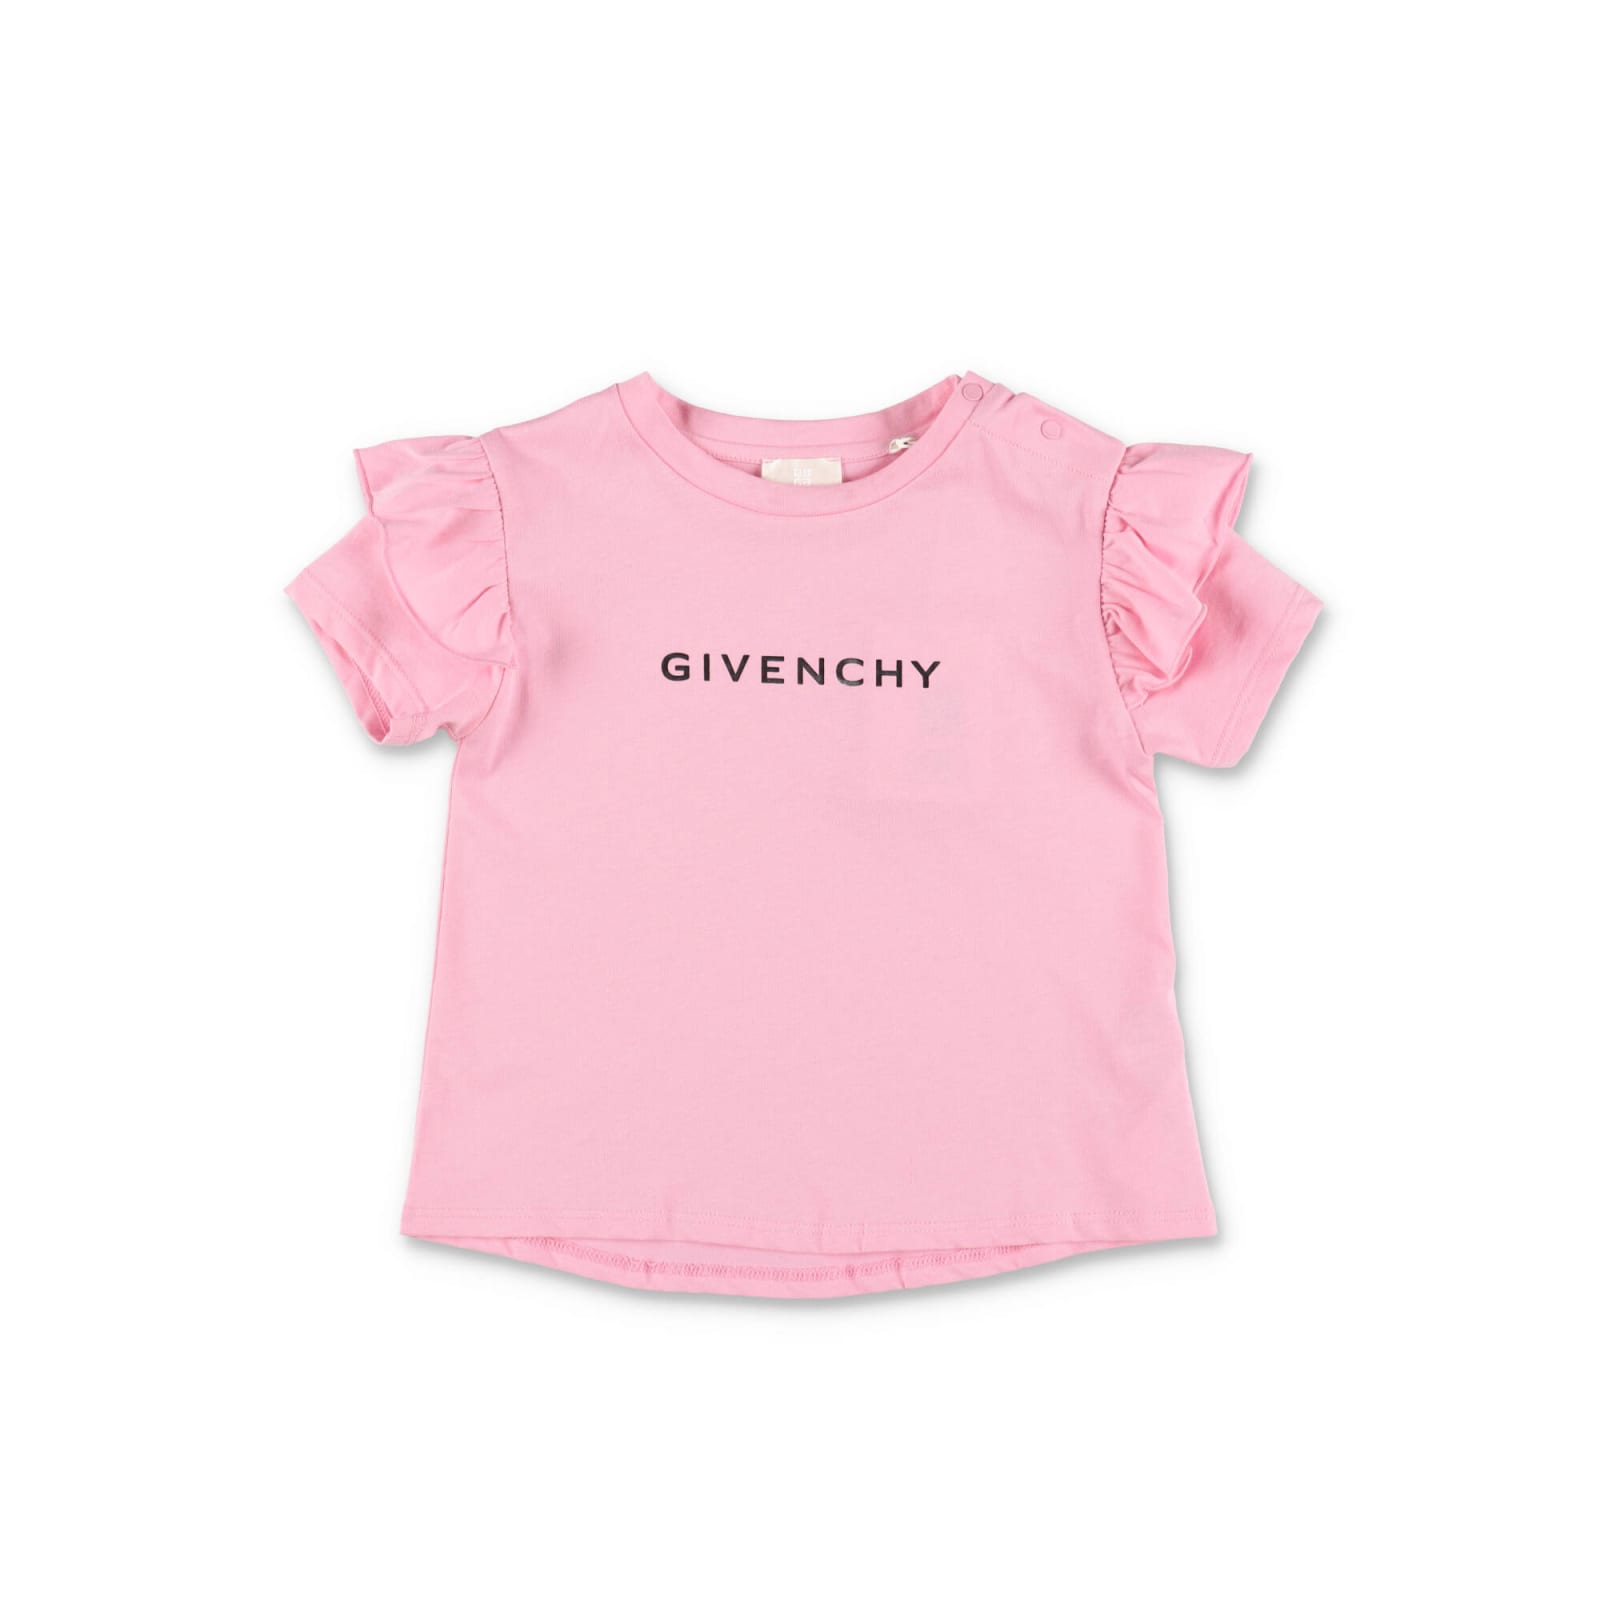 GIVENCHY GIVENCHY T-SHIRT ROSA IN JERSEY DI COTONE BABY GIRL